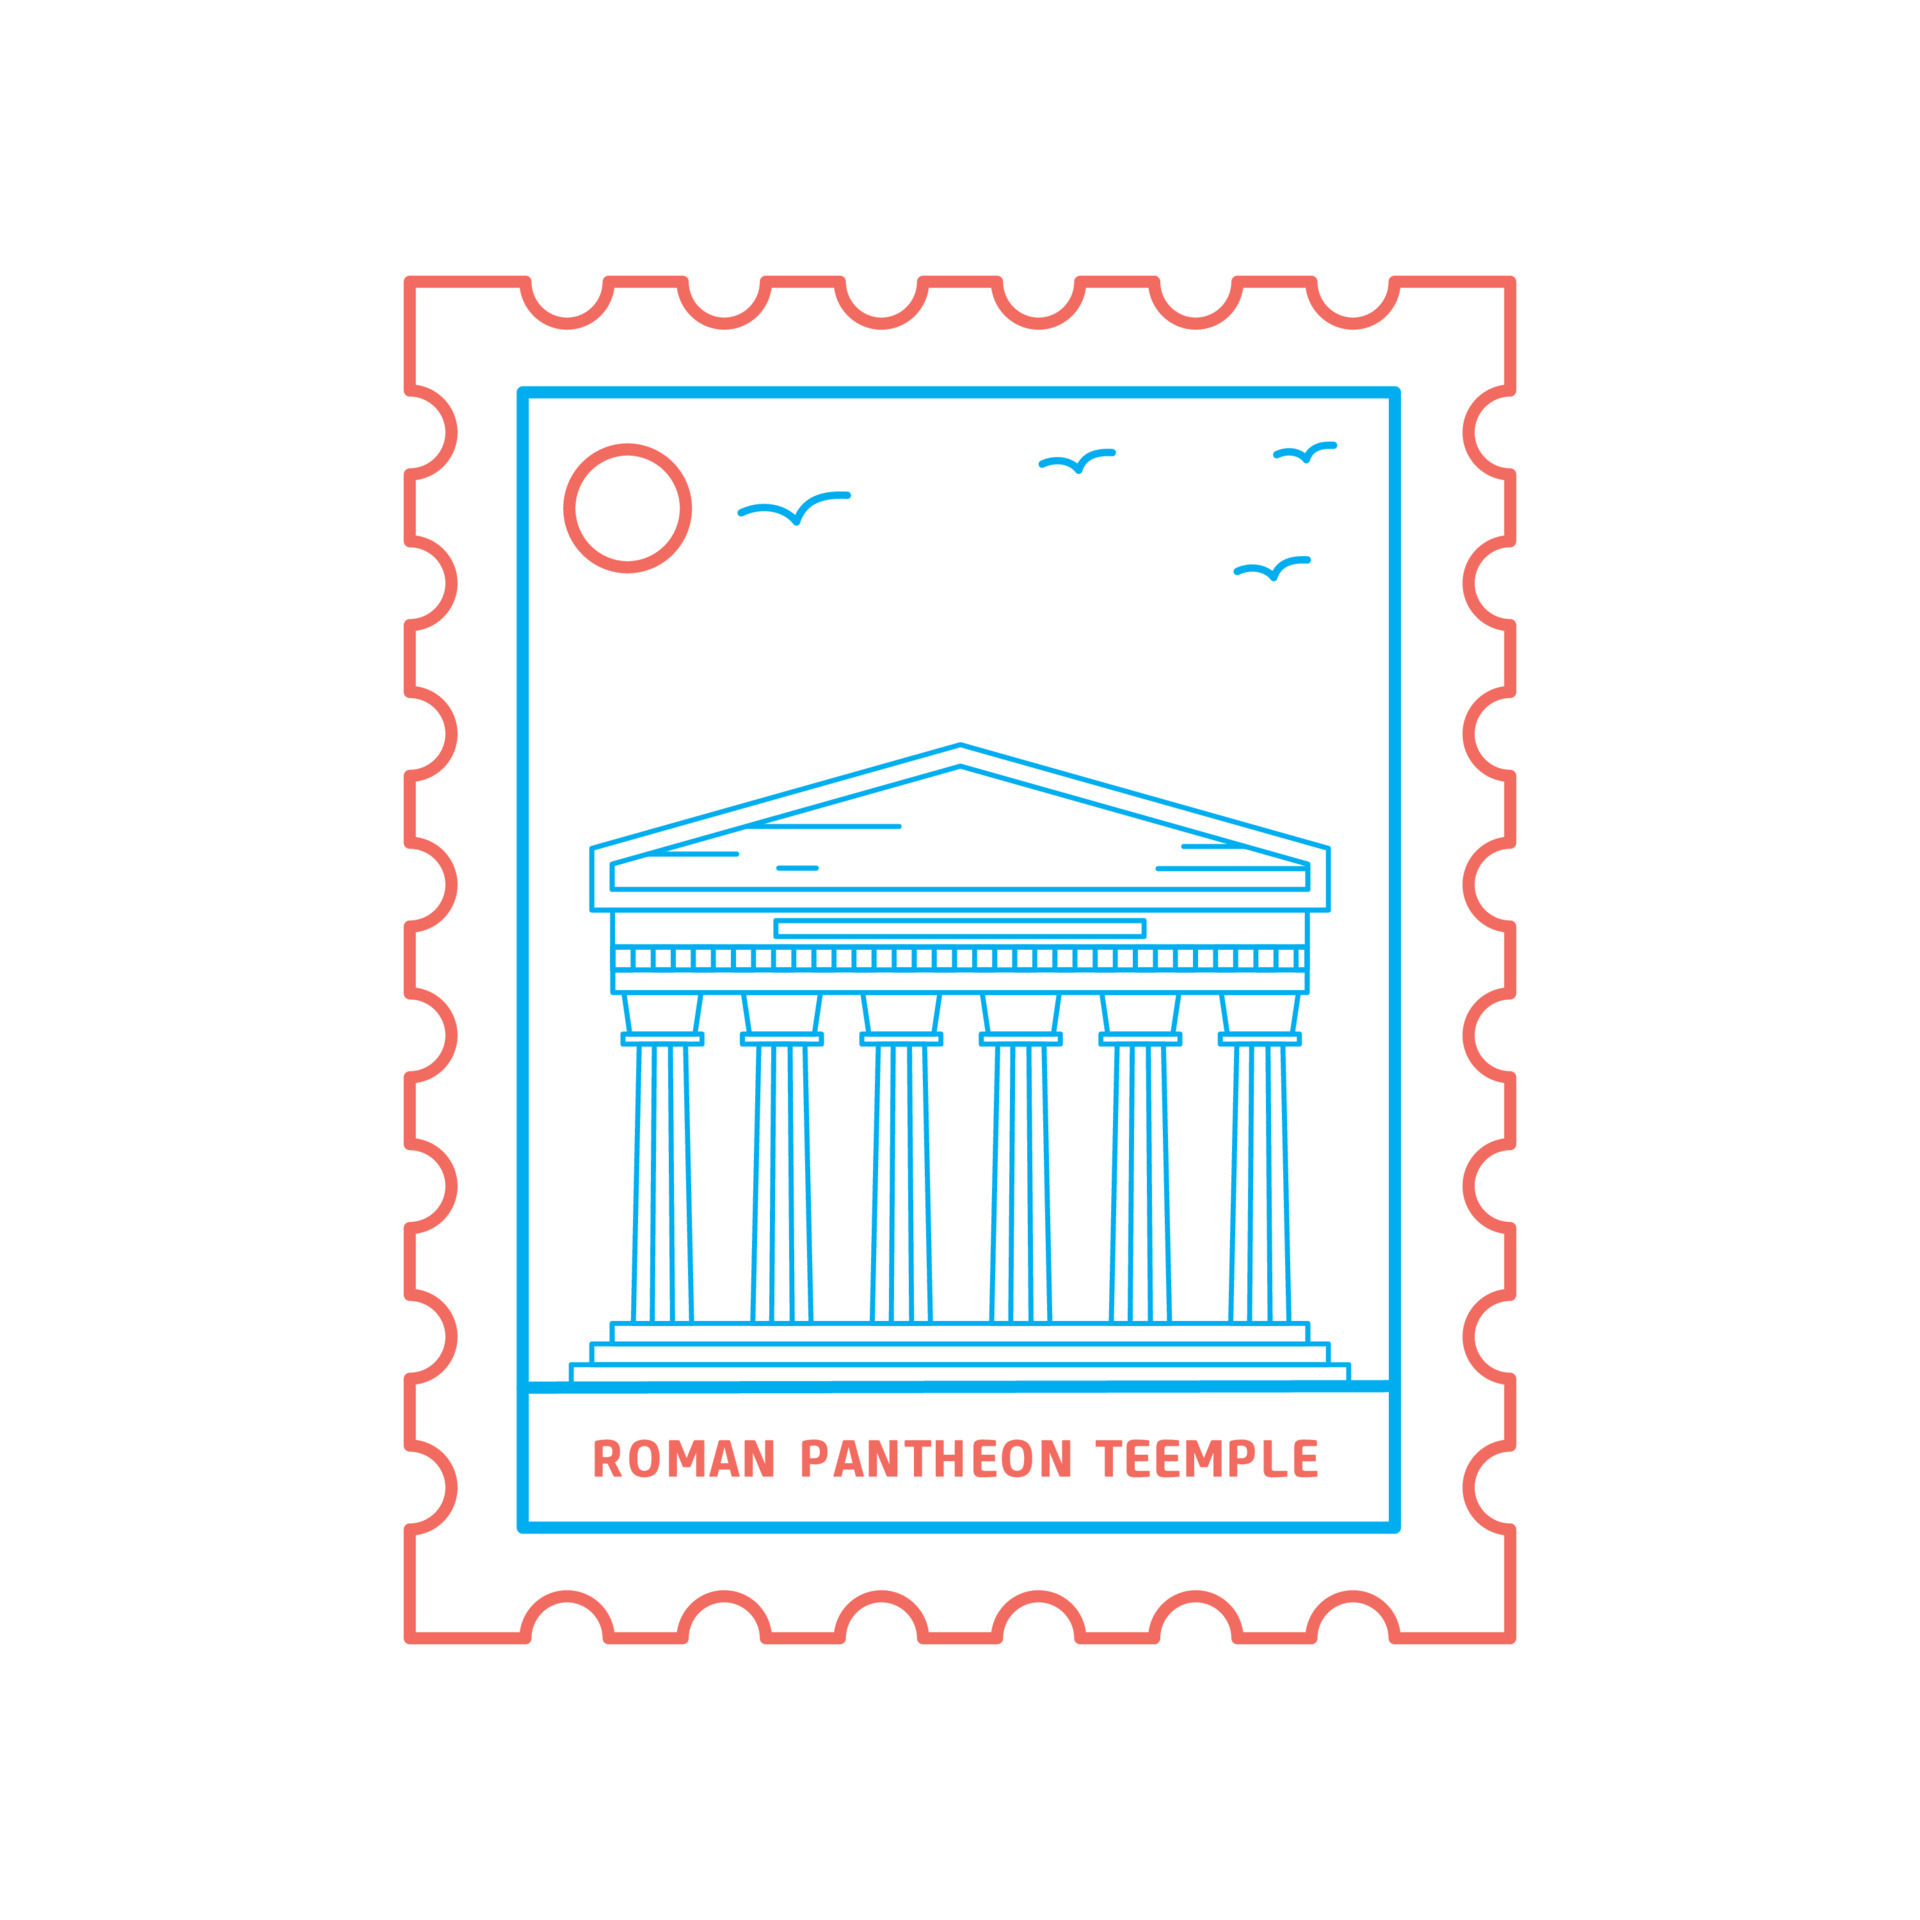 ROMAN PANTHEON TEEMPLE postage stamp Blue and red Line Style vector ...